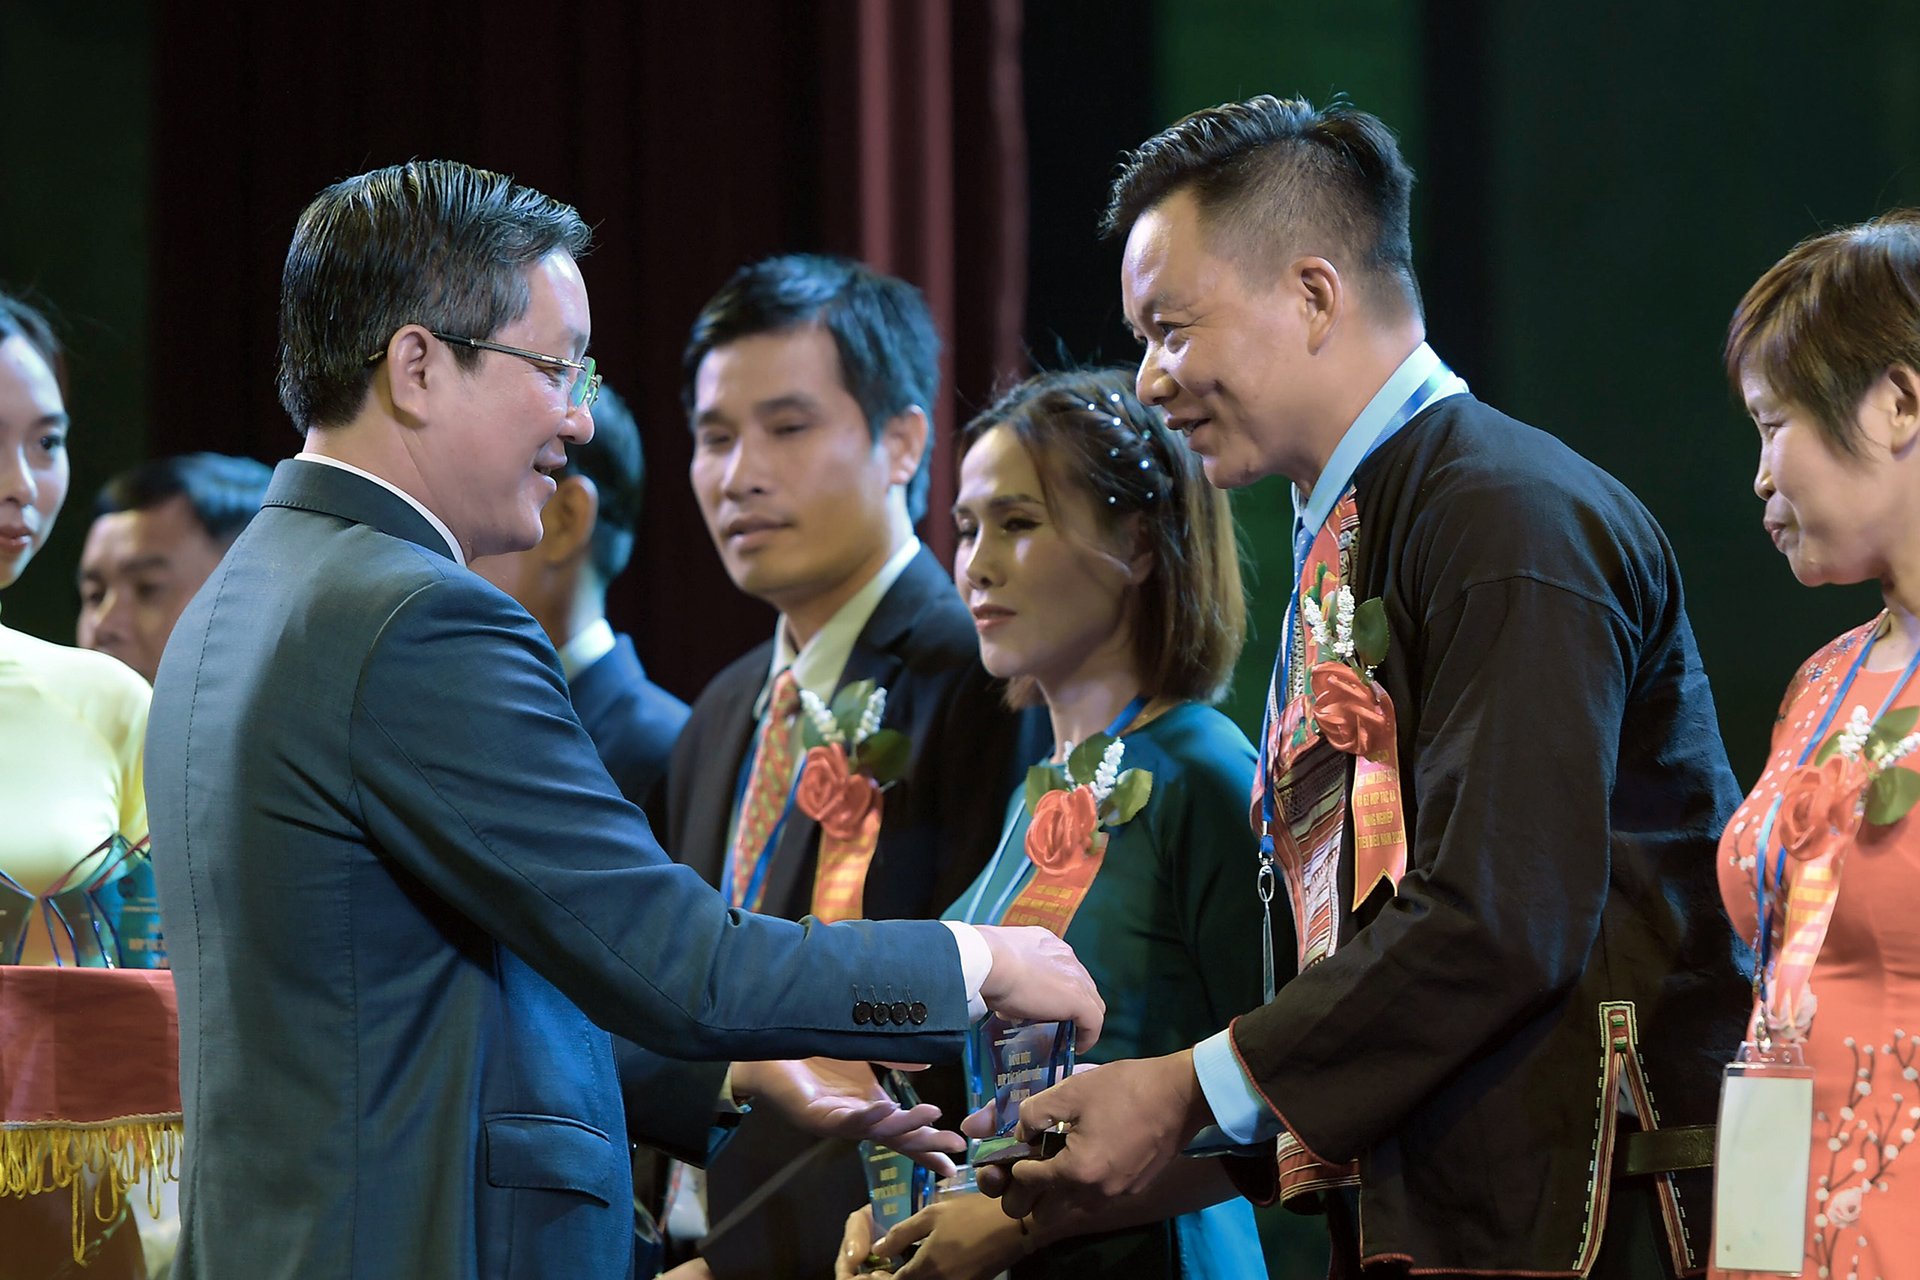 The Chairman of the Central Vietnam Farmers' Union awarded medals to outstanding farmers and typical cooperatives.